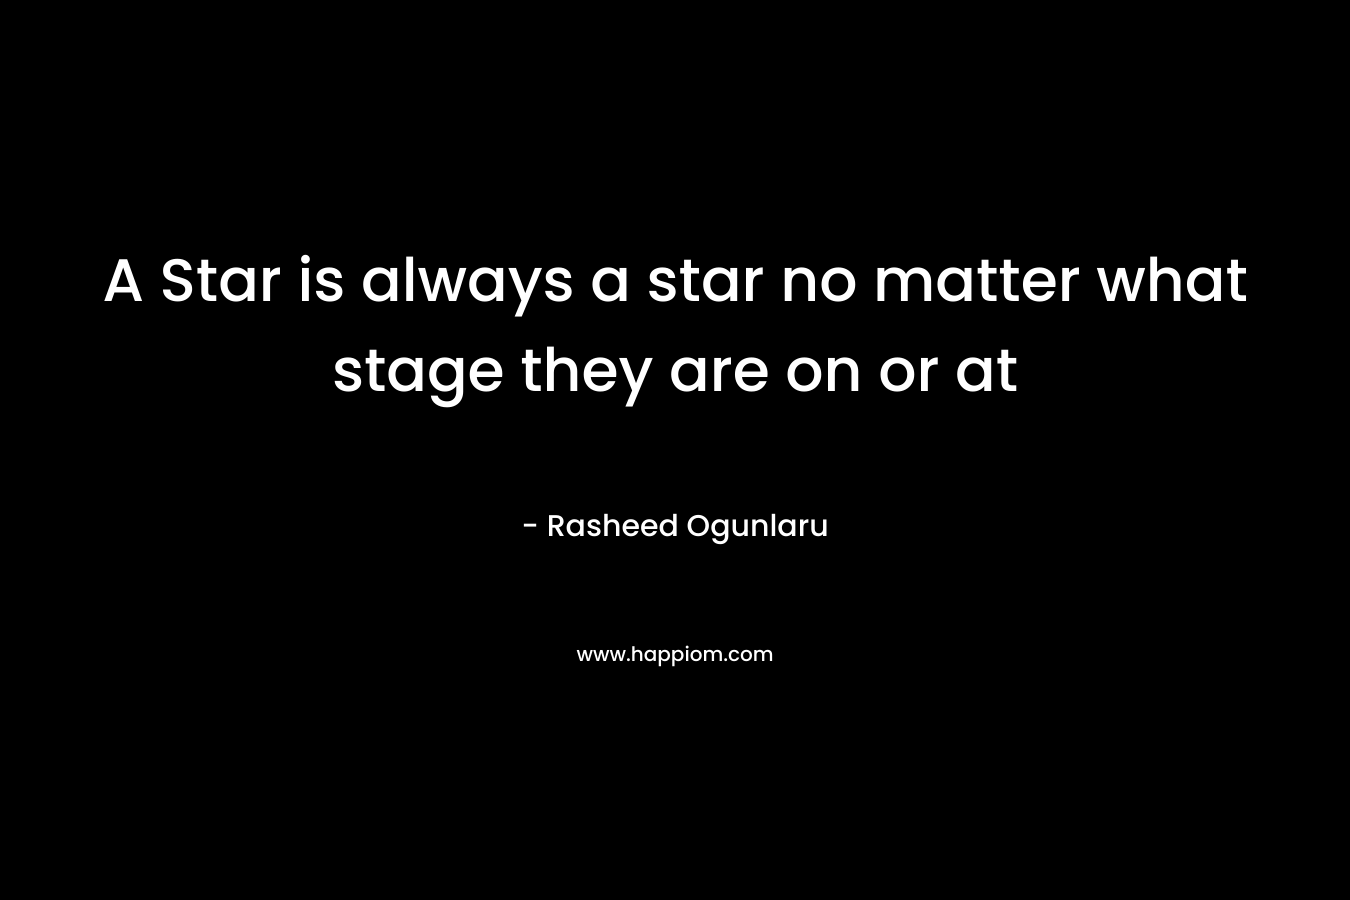 A Star is always a star no matter what stage they are on or at